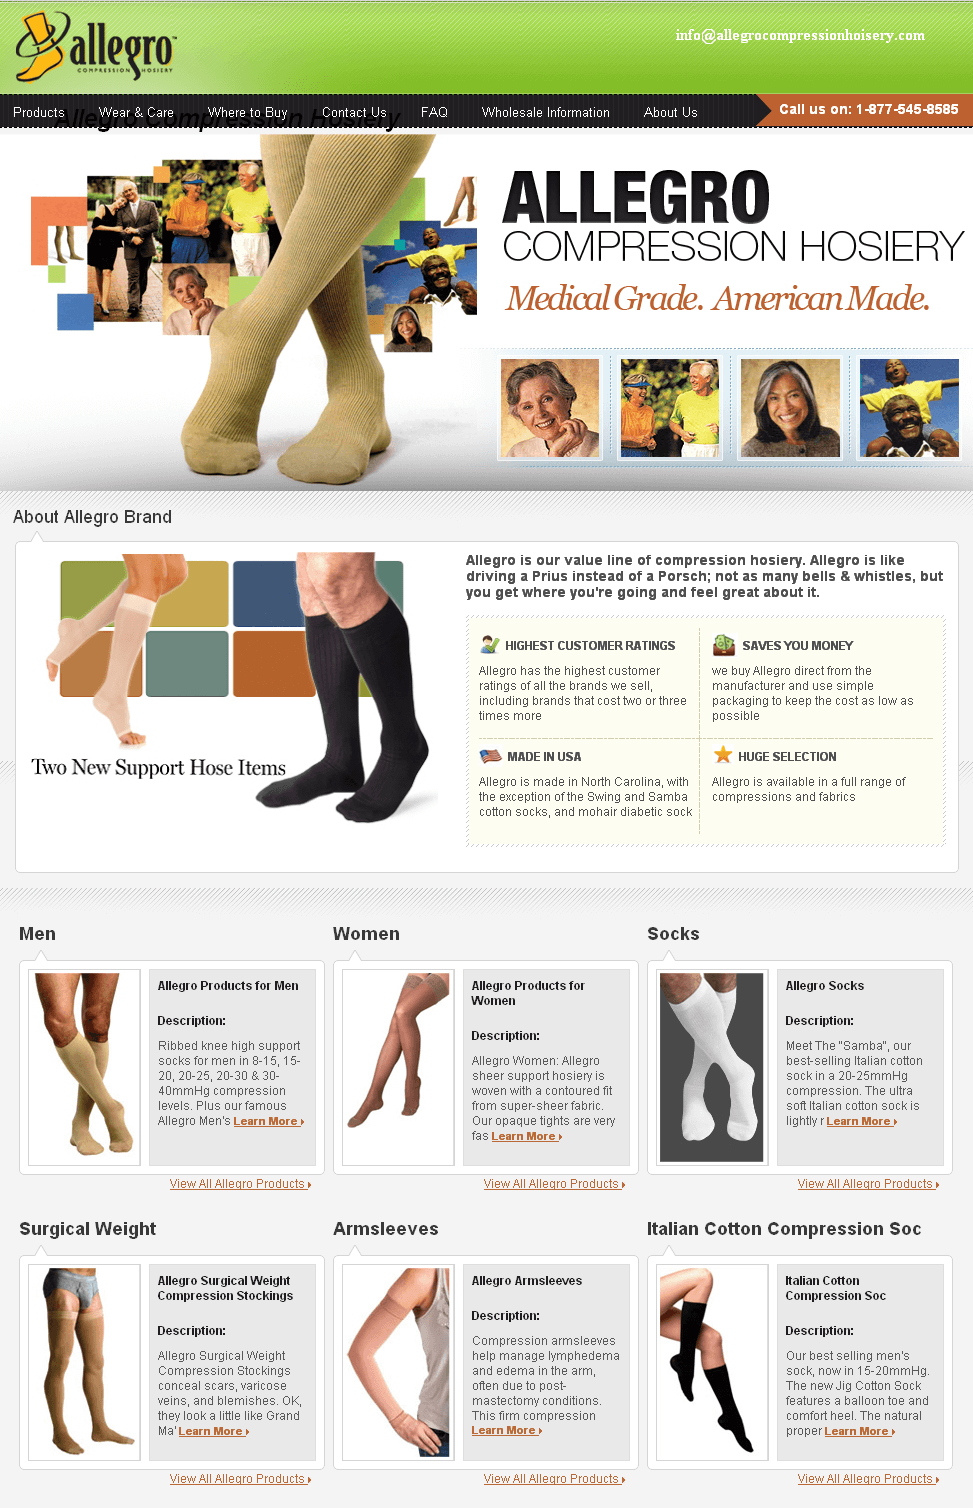  Website for 'Allegro' Using PHP- Compression Stockings & Socks